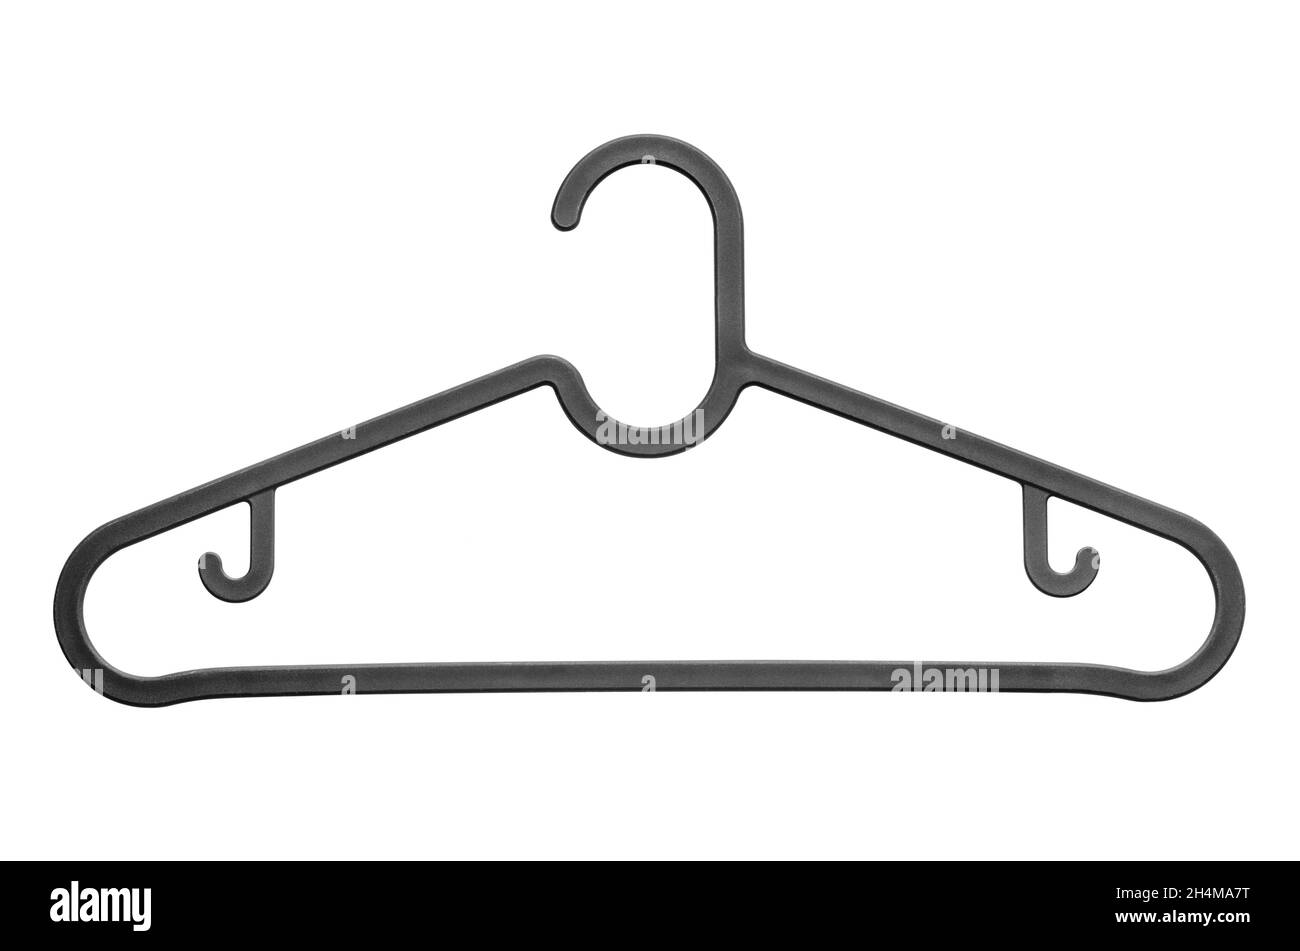 Black plastic coat hanger / clothes hanger isolated on a white background Stock Photo